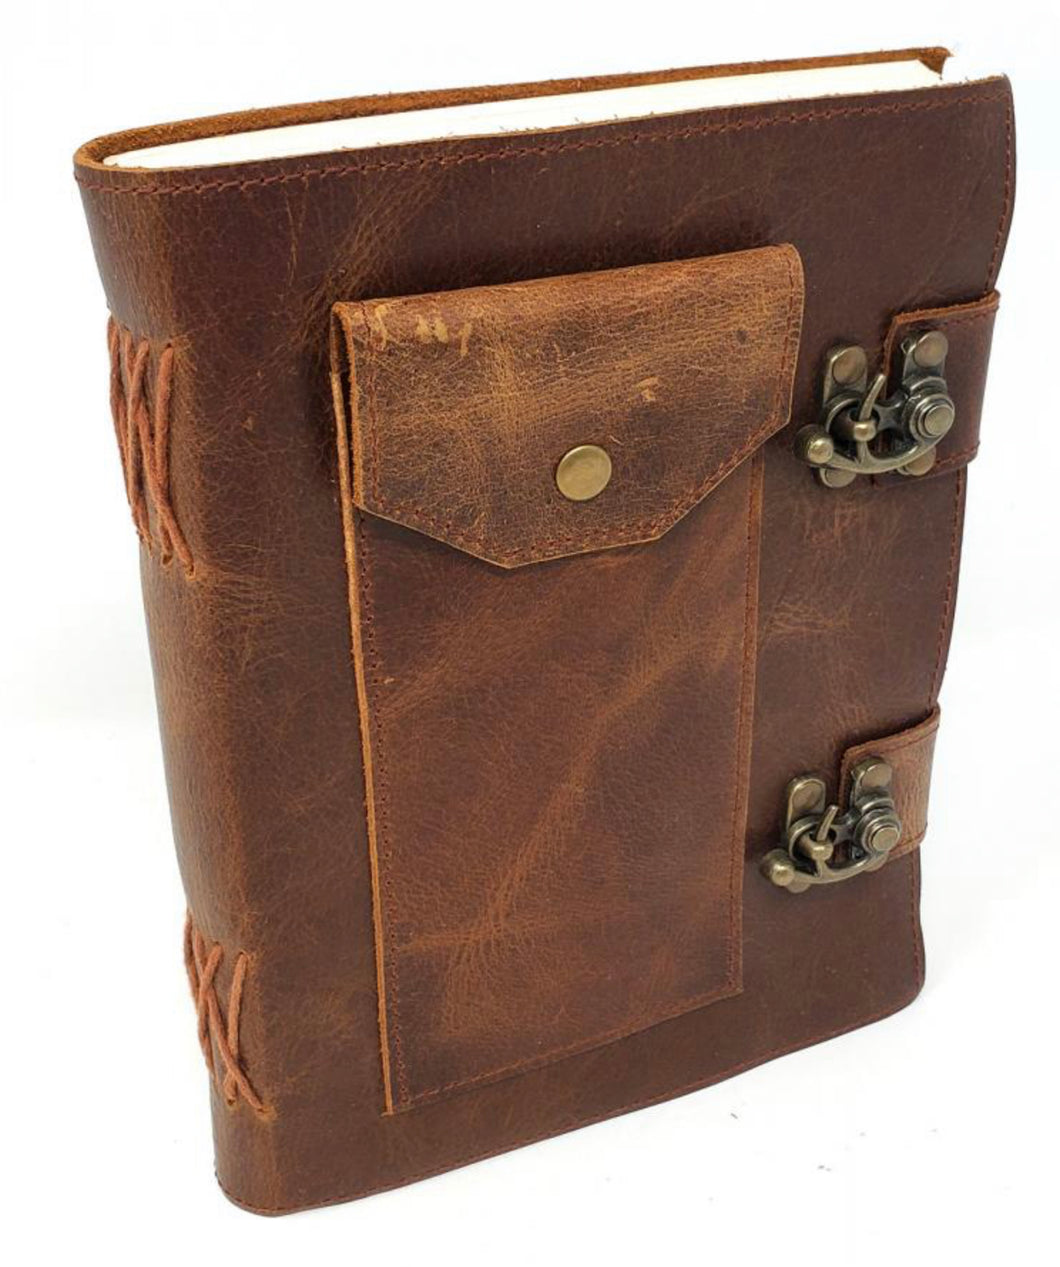 Soft Leather Journal with pocket 6 x 8